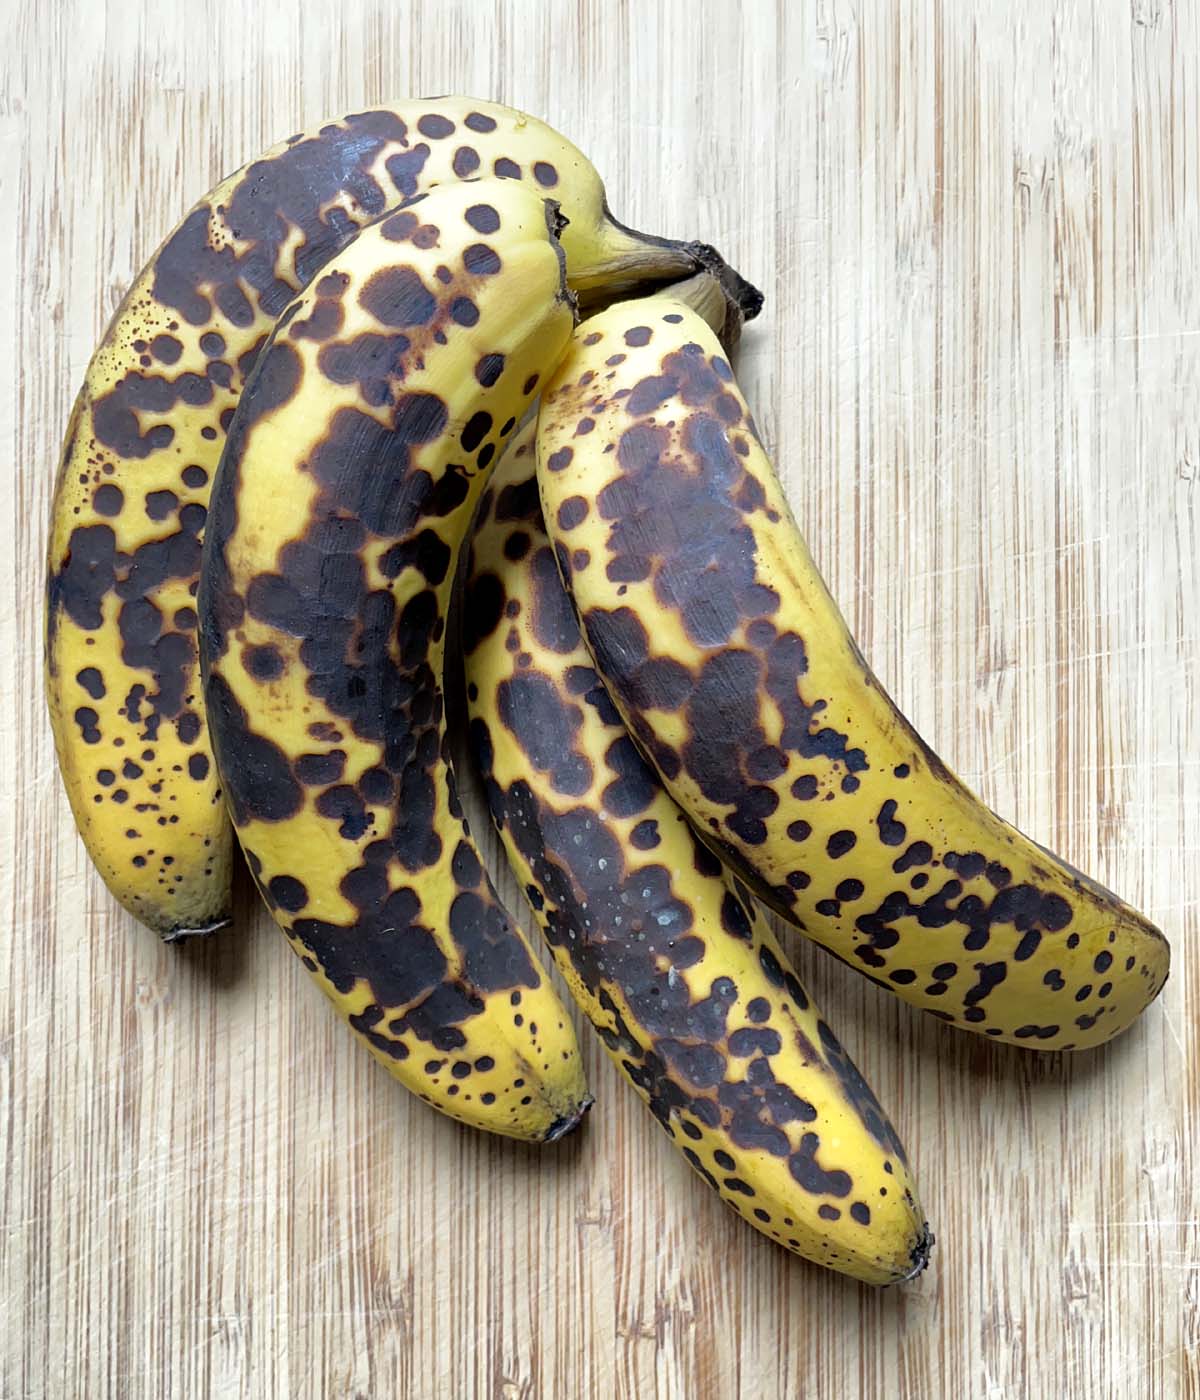 A bunch of bananas very black spotted skins.